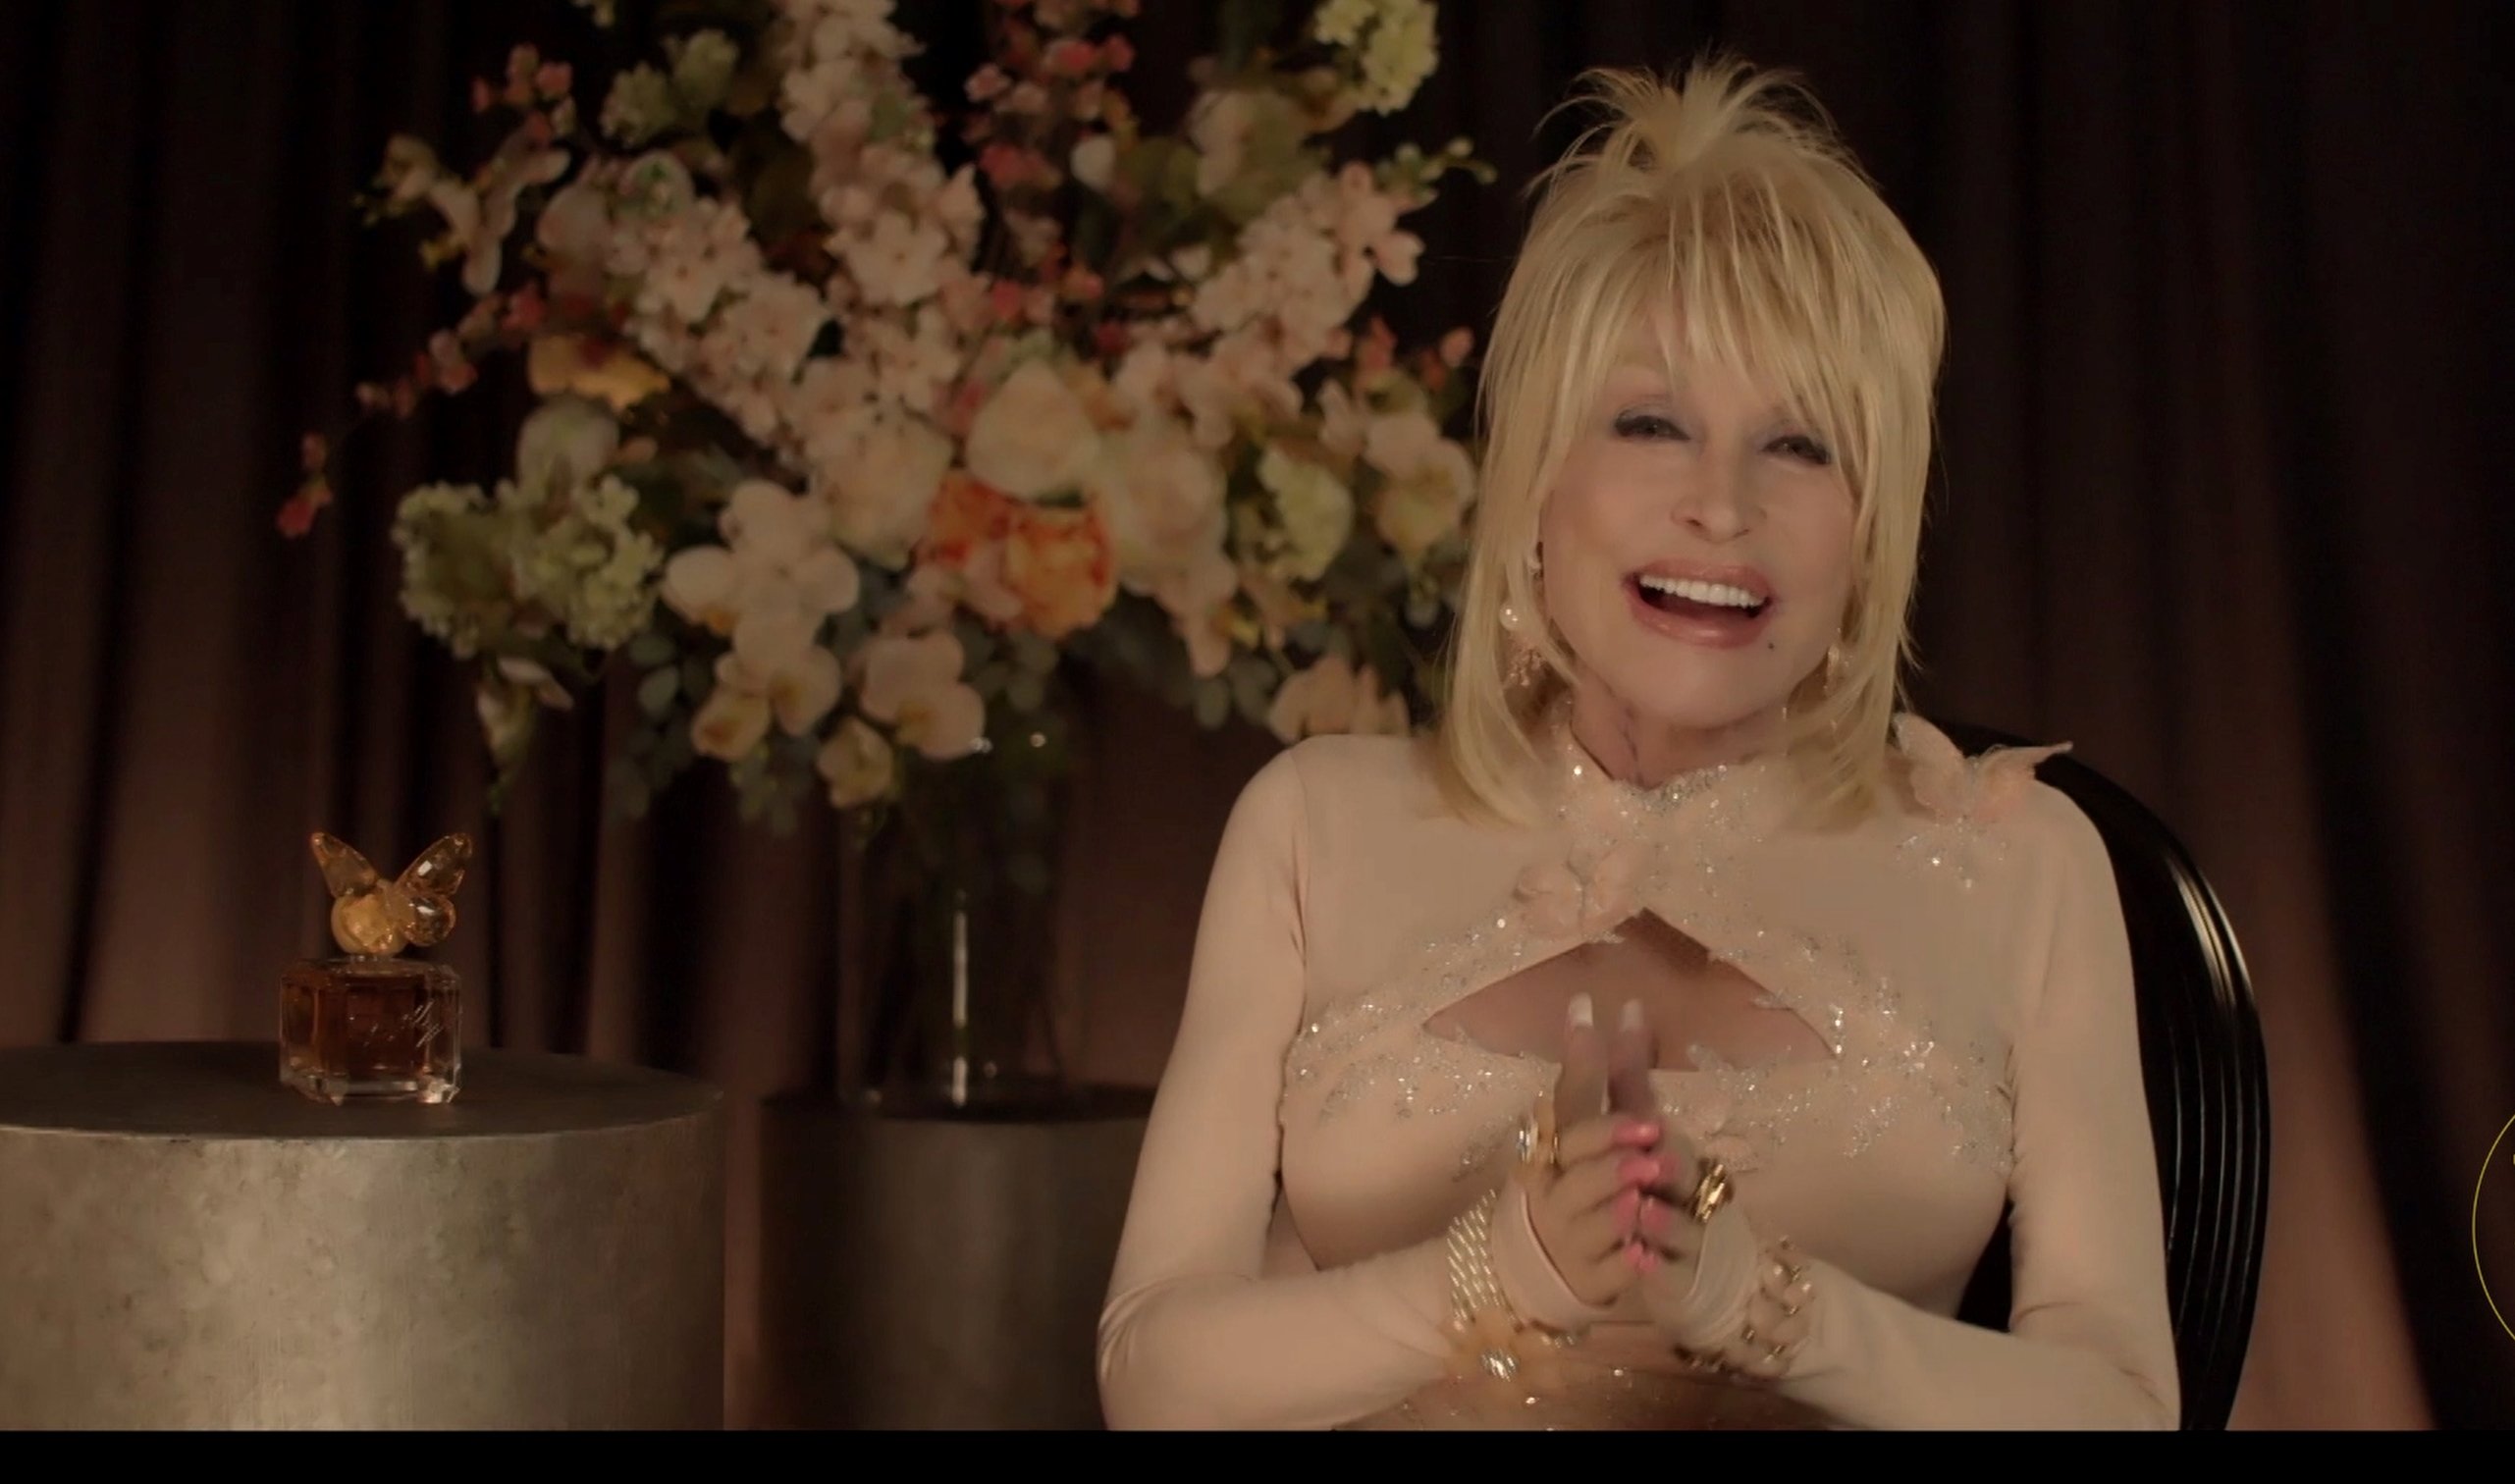 Screengrab of Dolly Parton during an interview on 'The Tonight Show Starring Jimmy Fallon'